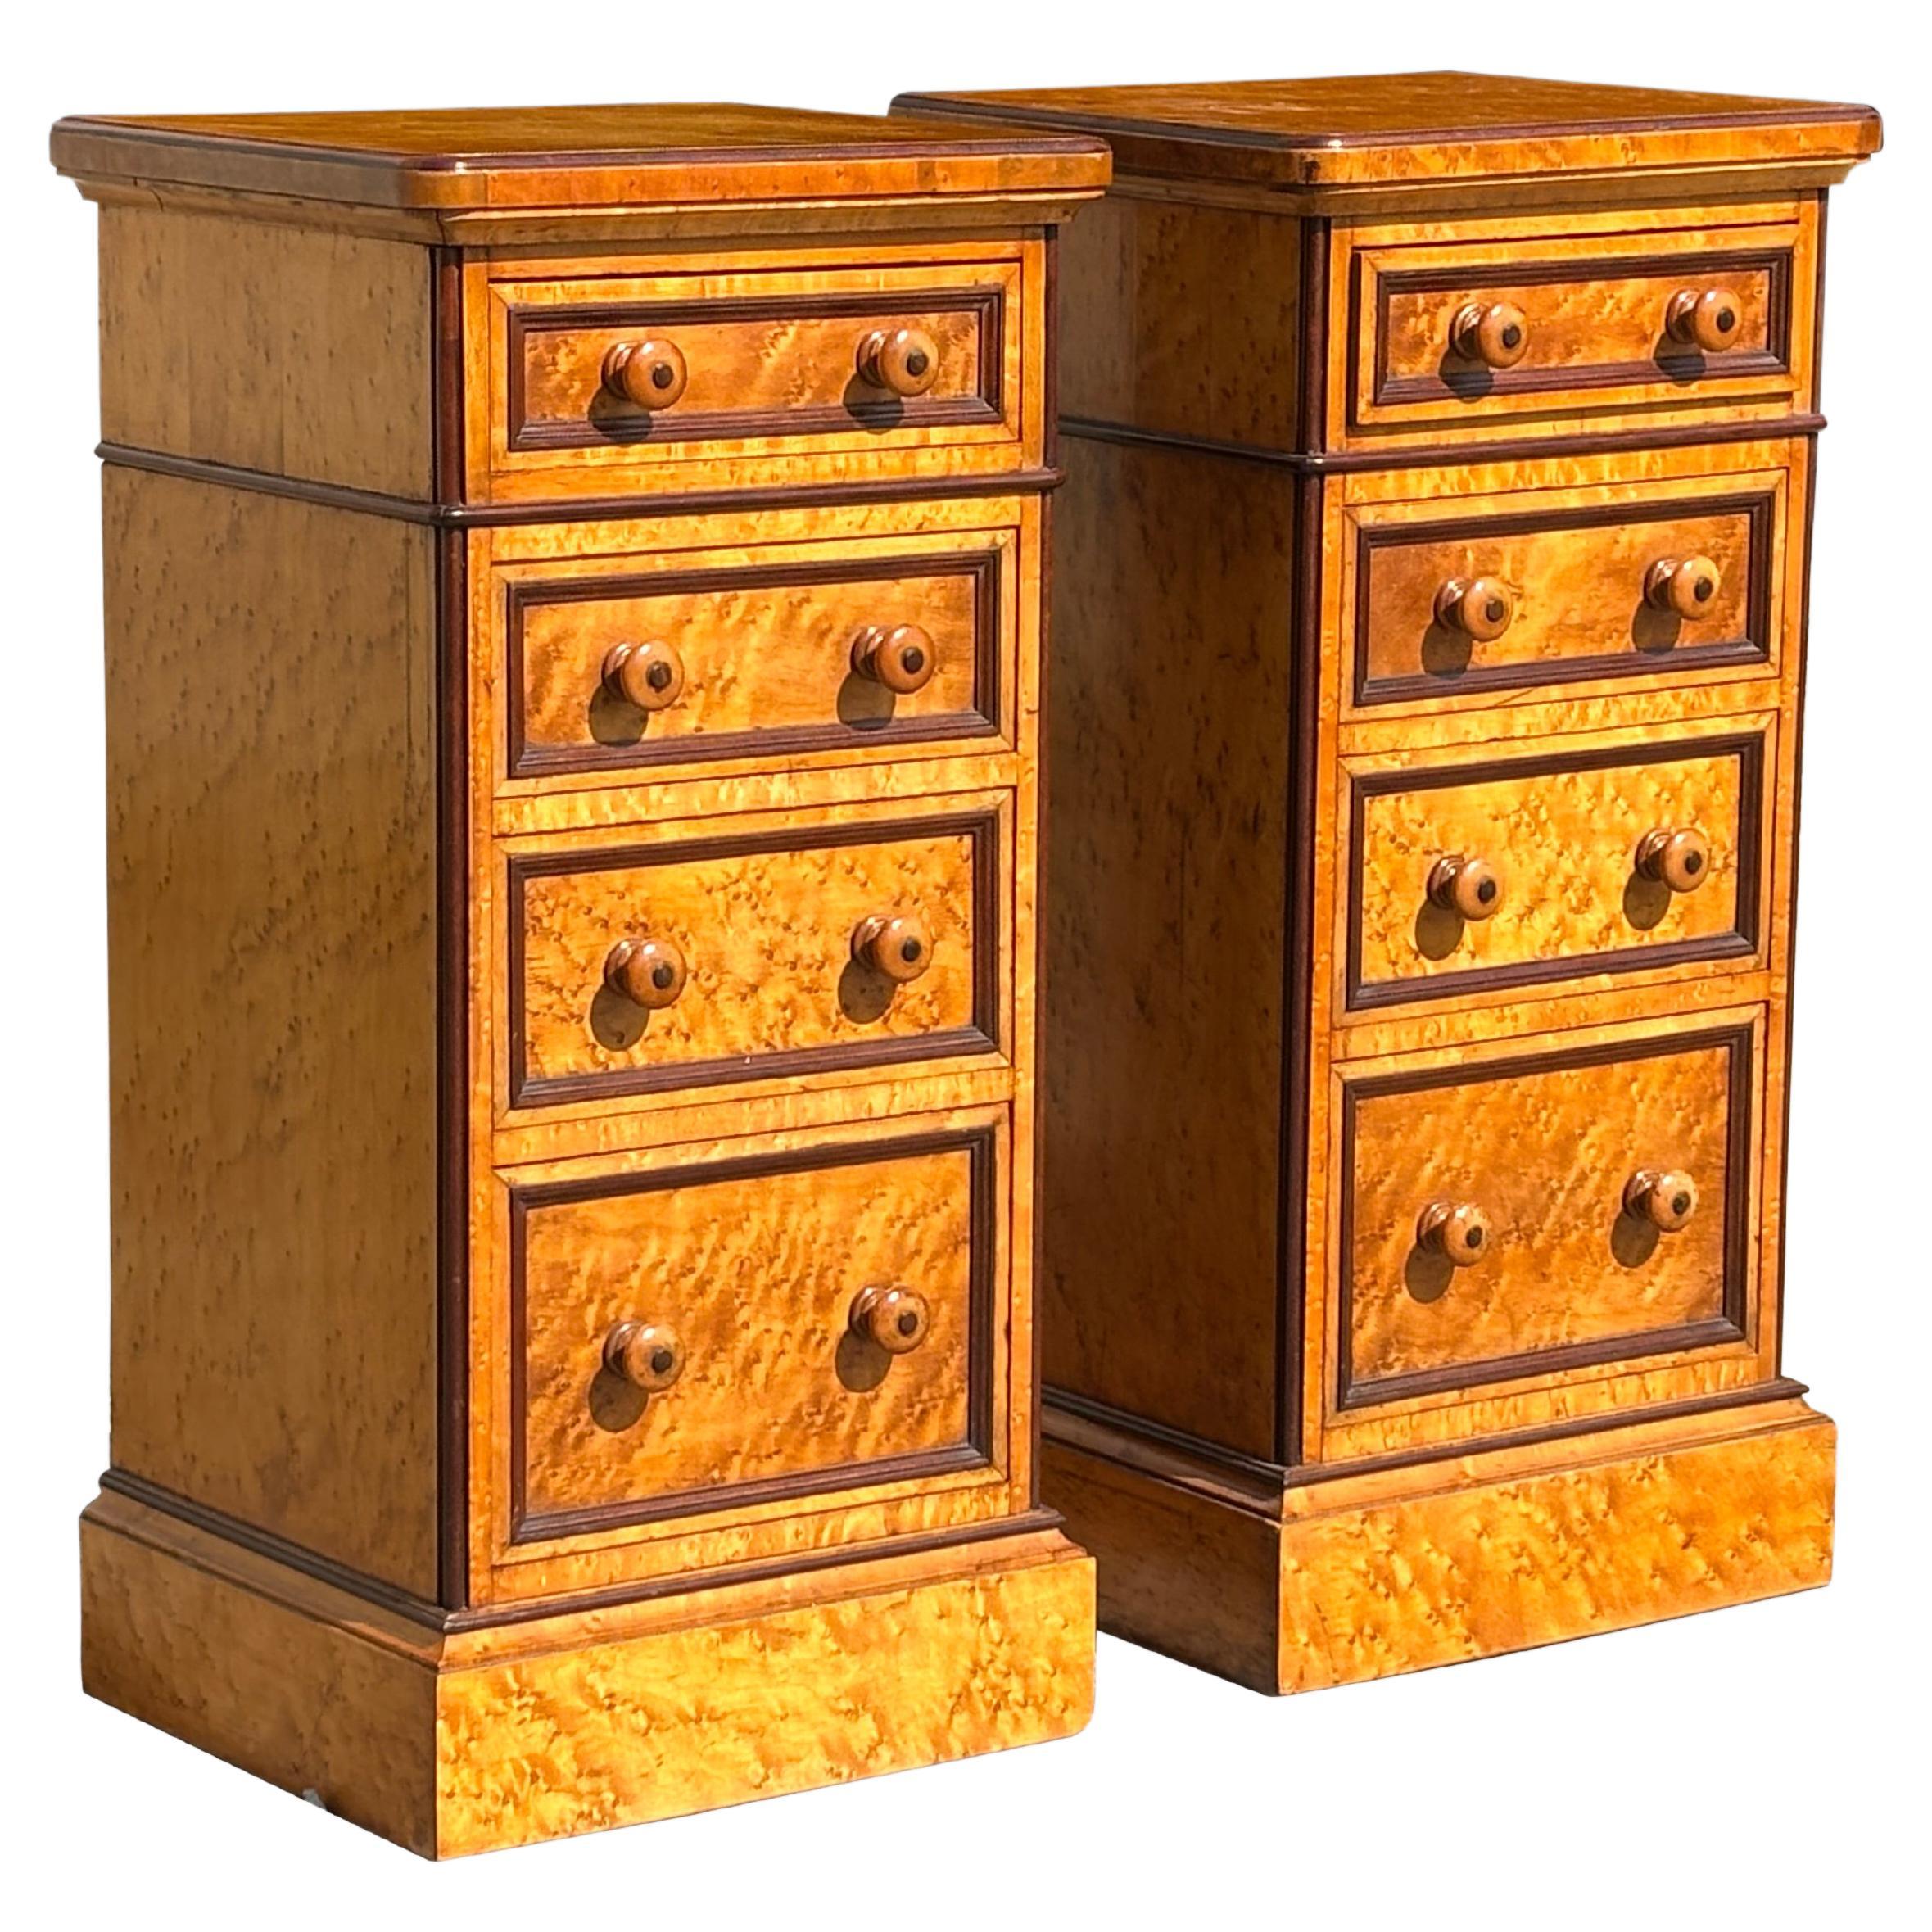 Pair of 19th Century Victorian Period Bedside Chests in Birdseye Maple